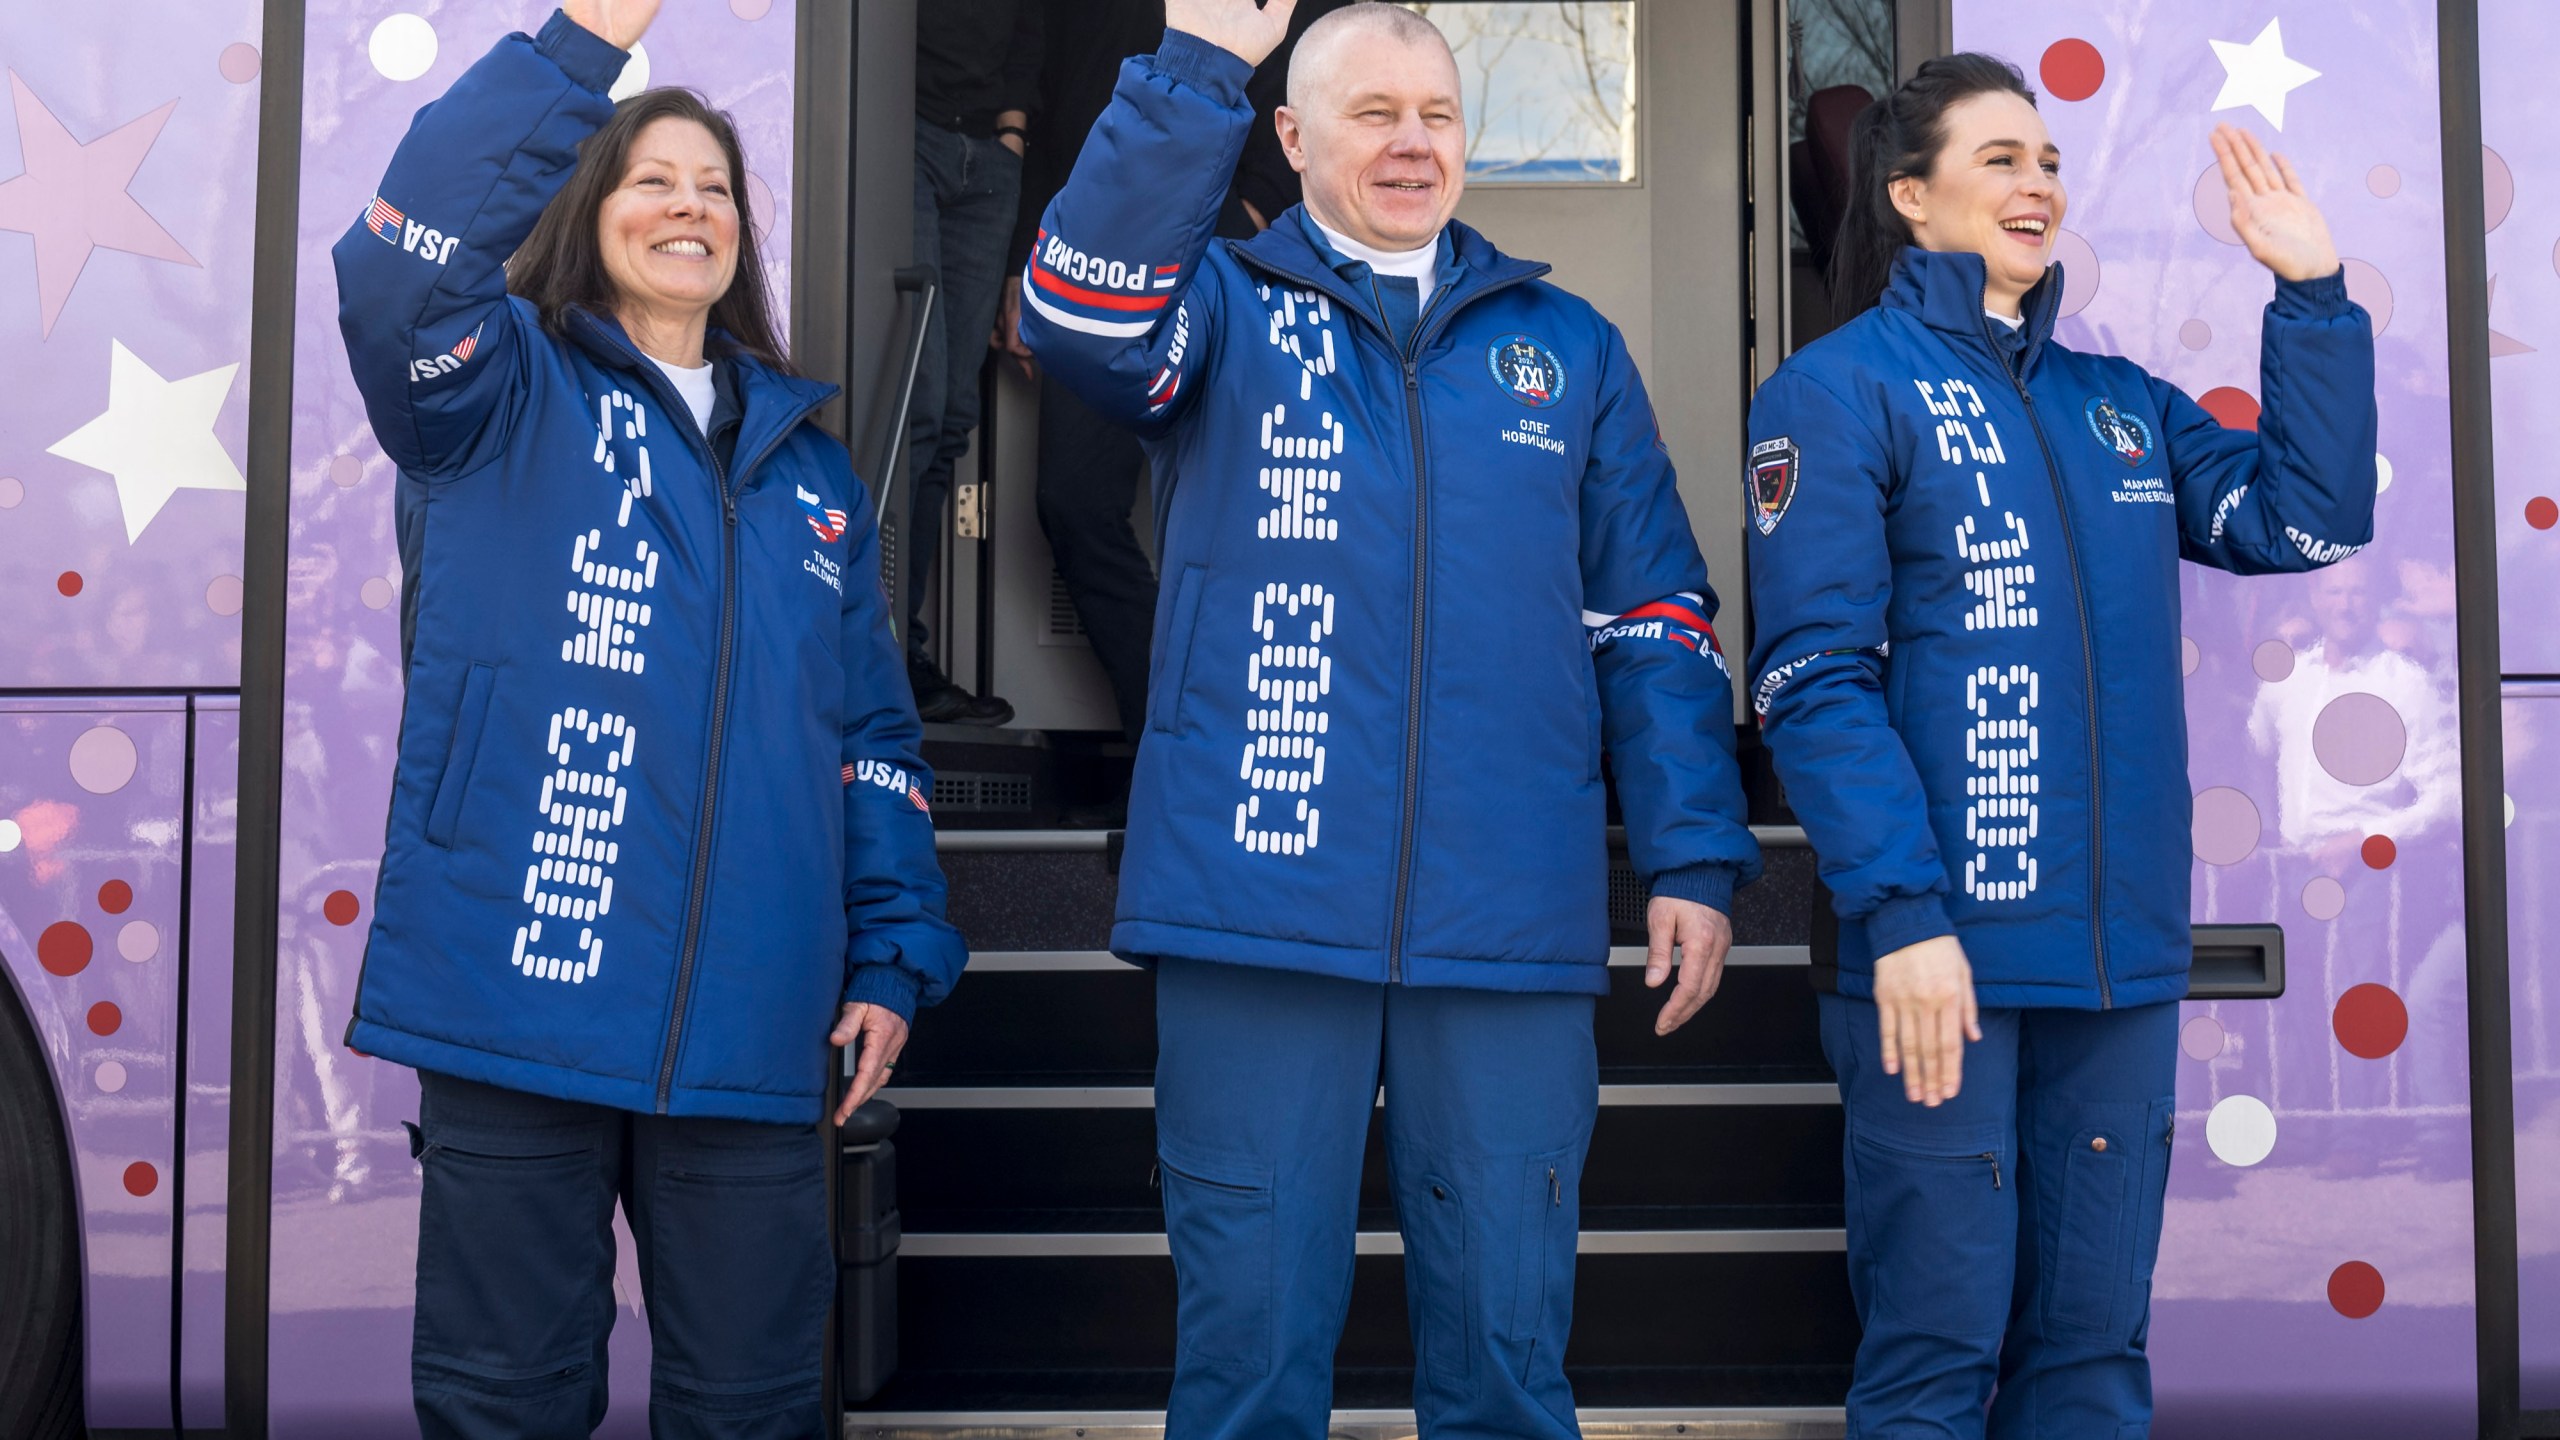 Expedition 71 NASA astronaut Tracy Dyson, from left, Roscosmos cosmonaut Oleg Novitskiy, and Belarus spaceflight participant Marina Vasilevskaya wave as they depart the Cosmonaut Hotel in Baikonur, Kazakhstan, Saturday, March 23, 2024, to suit up for their Soyuz launch to the International Space Station. Russia’s Roscosmos space agency has aborted the launch of three astronauts to the International Space Station about 20 seconds before they were scheduled to lift off. Russia's Roscosmos space corporation said the next launch attempt is set for Saturday. (Bill Ingalls/NASA via AP)